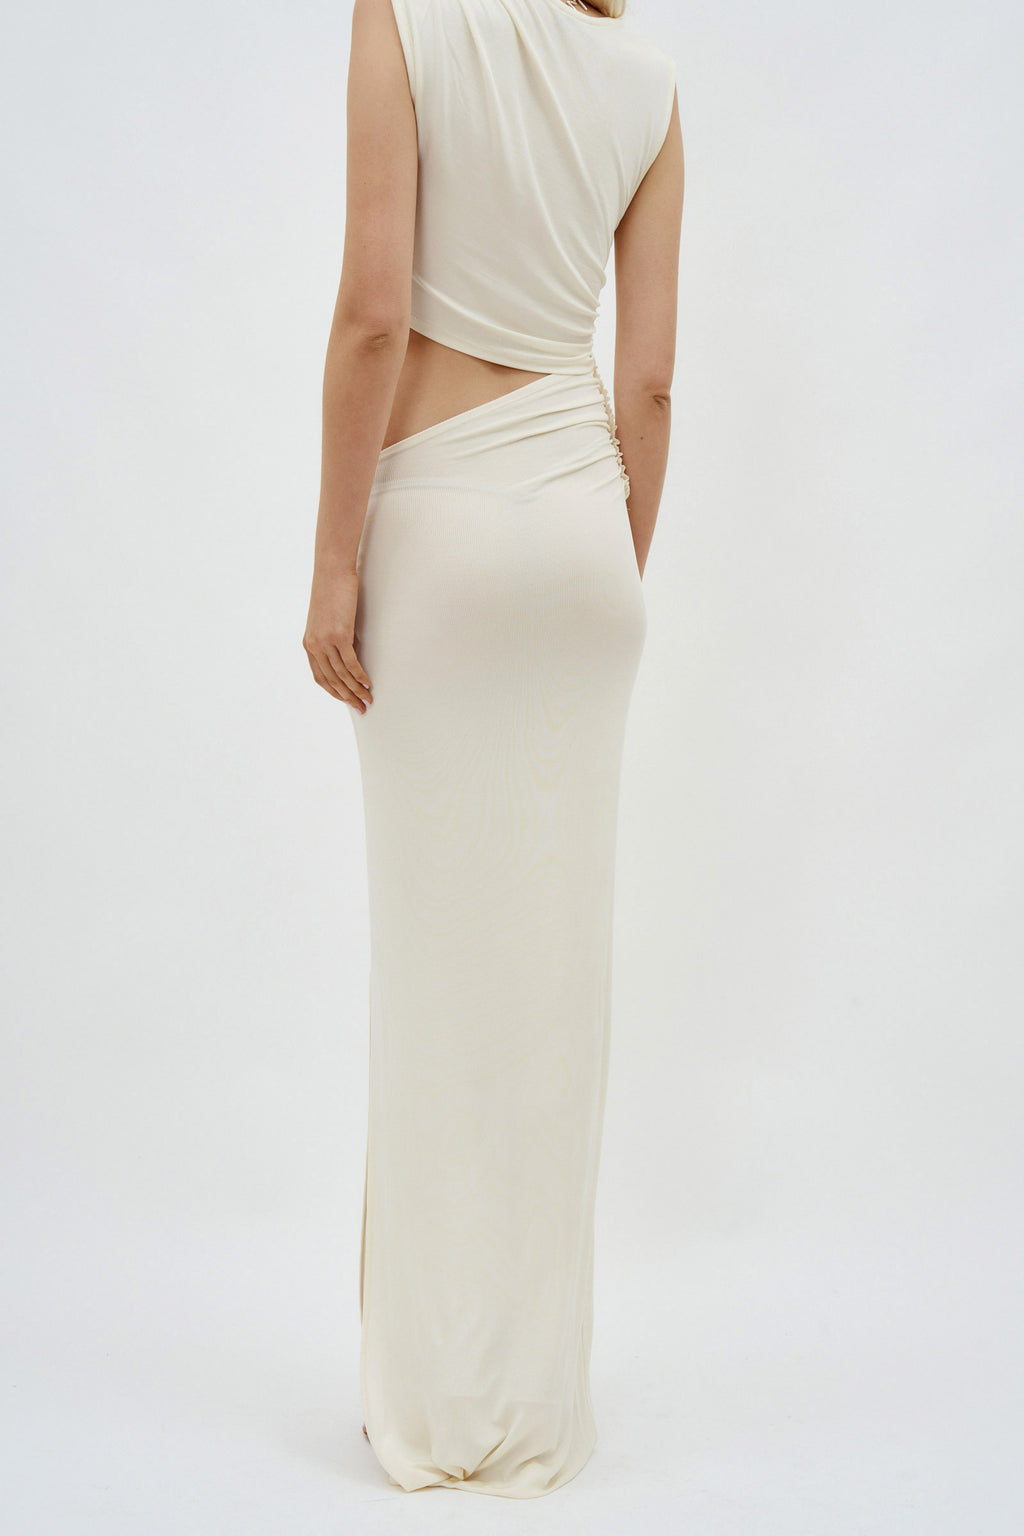 Cut Out Sleeveless Long Ribbed Off White Dress